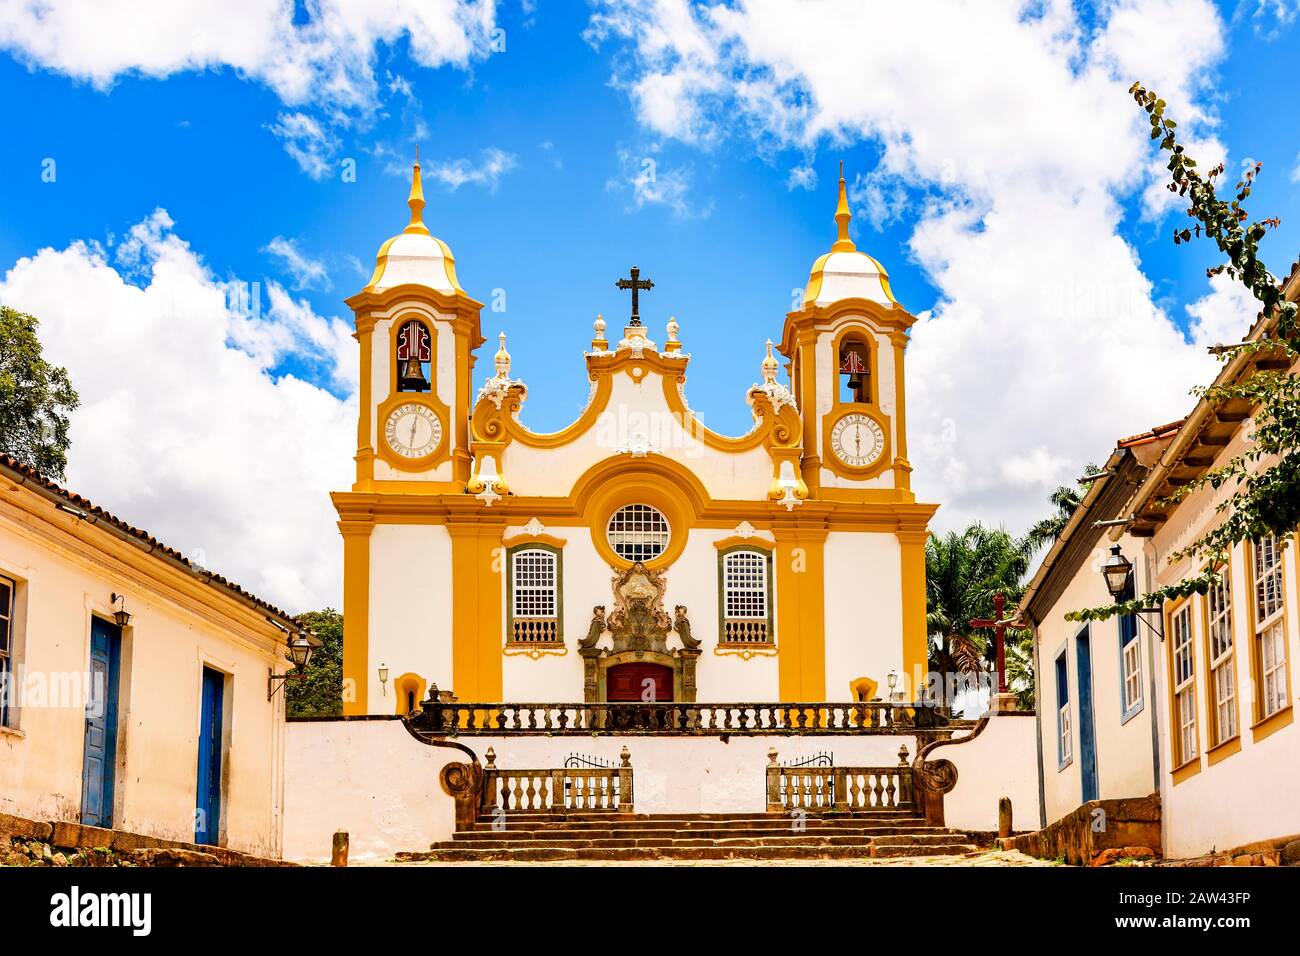 Facade of an old church built in the 18th century in baroque style in downtow of the famous city of Tiradentes, Minas Gerais Stock Photo